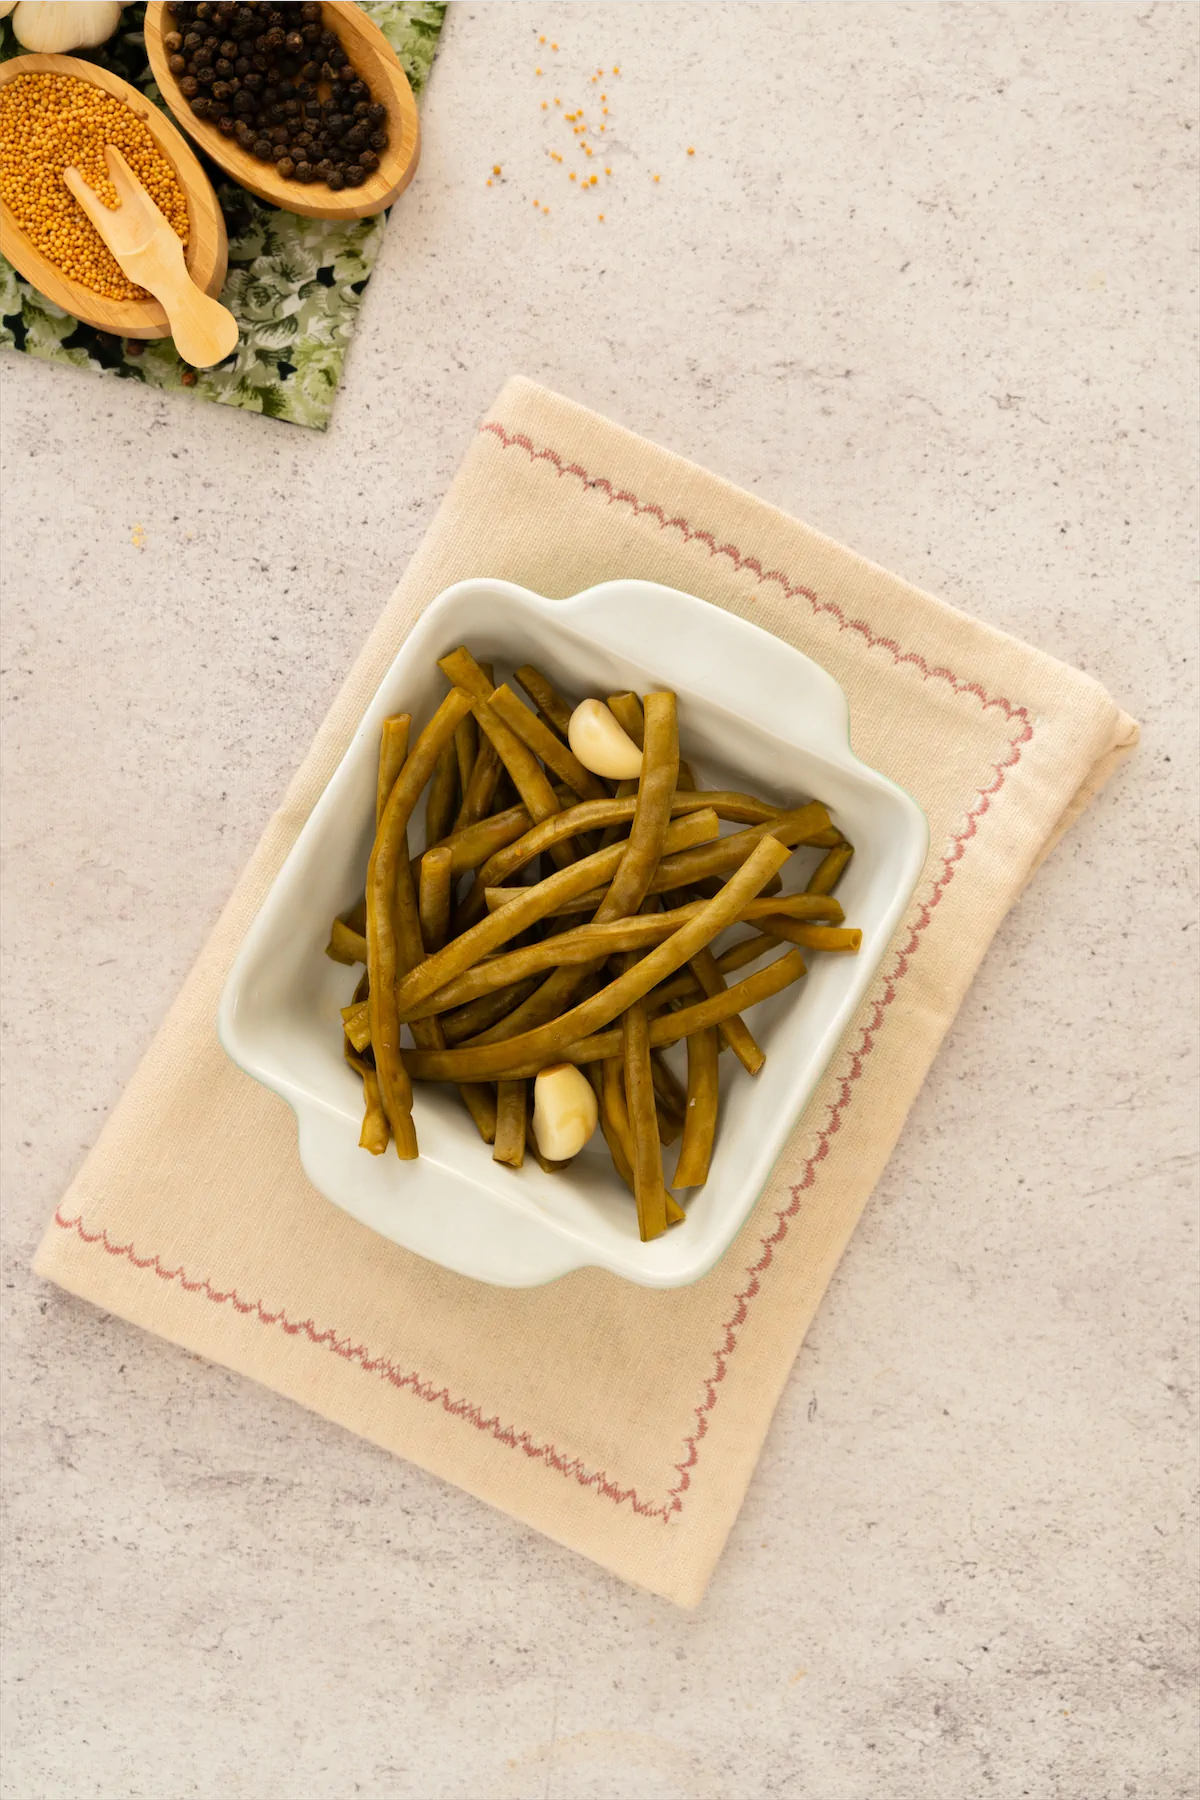 Homemade pickled green beans and a pair of garlic cloves presented in a square white bowl.